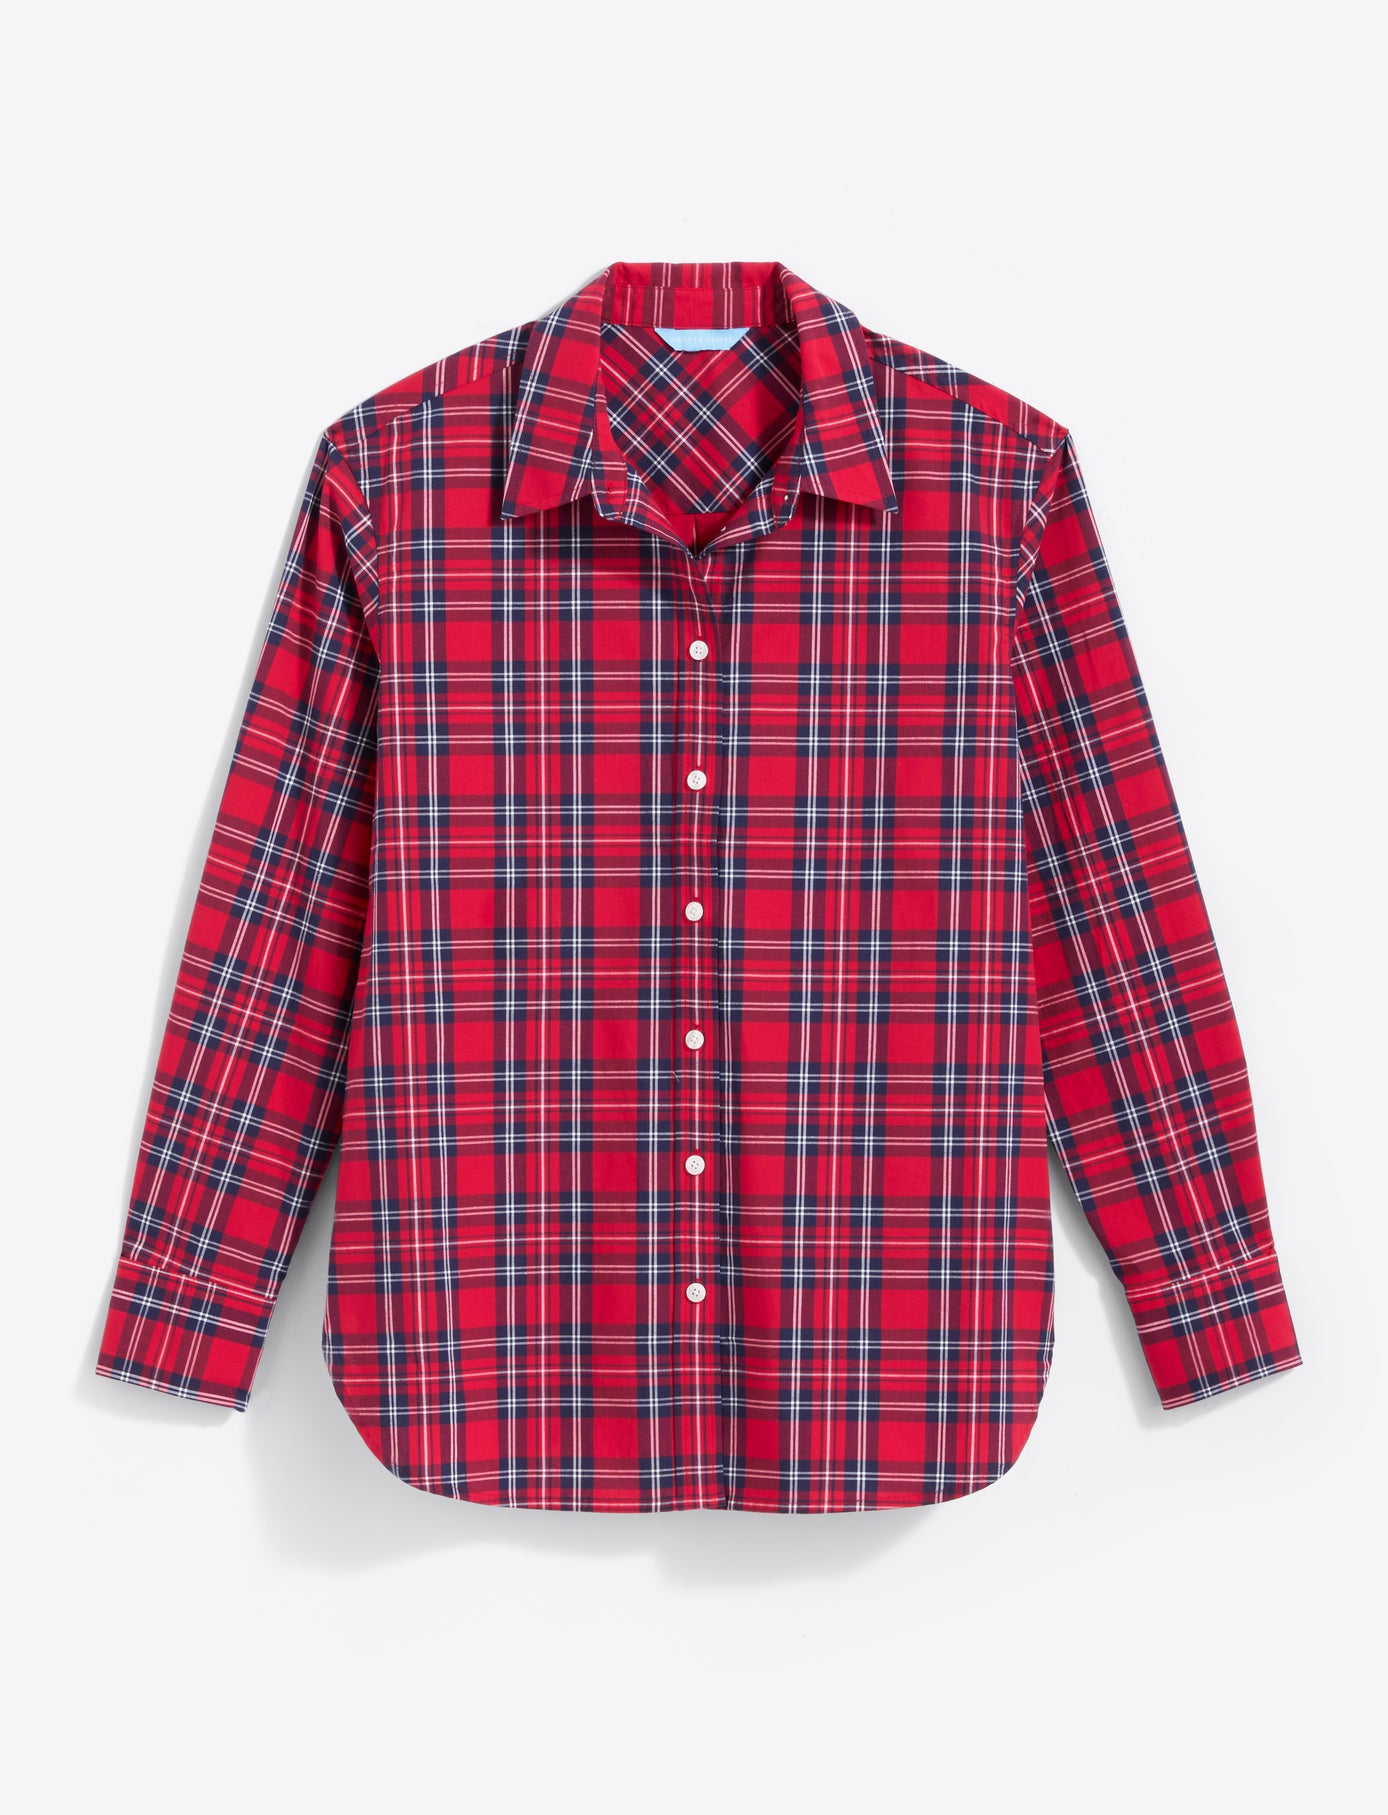 Tanner Buttondown Top in Angie Plaid